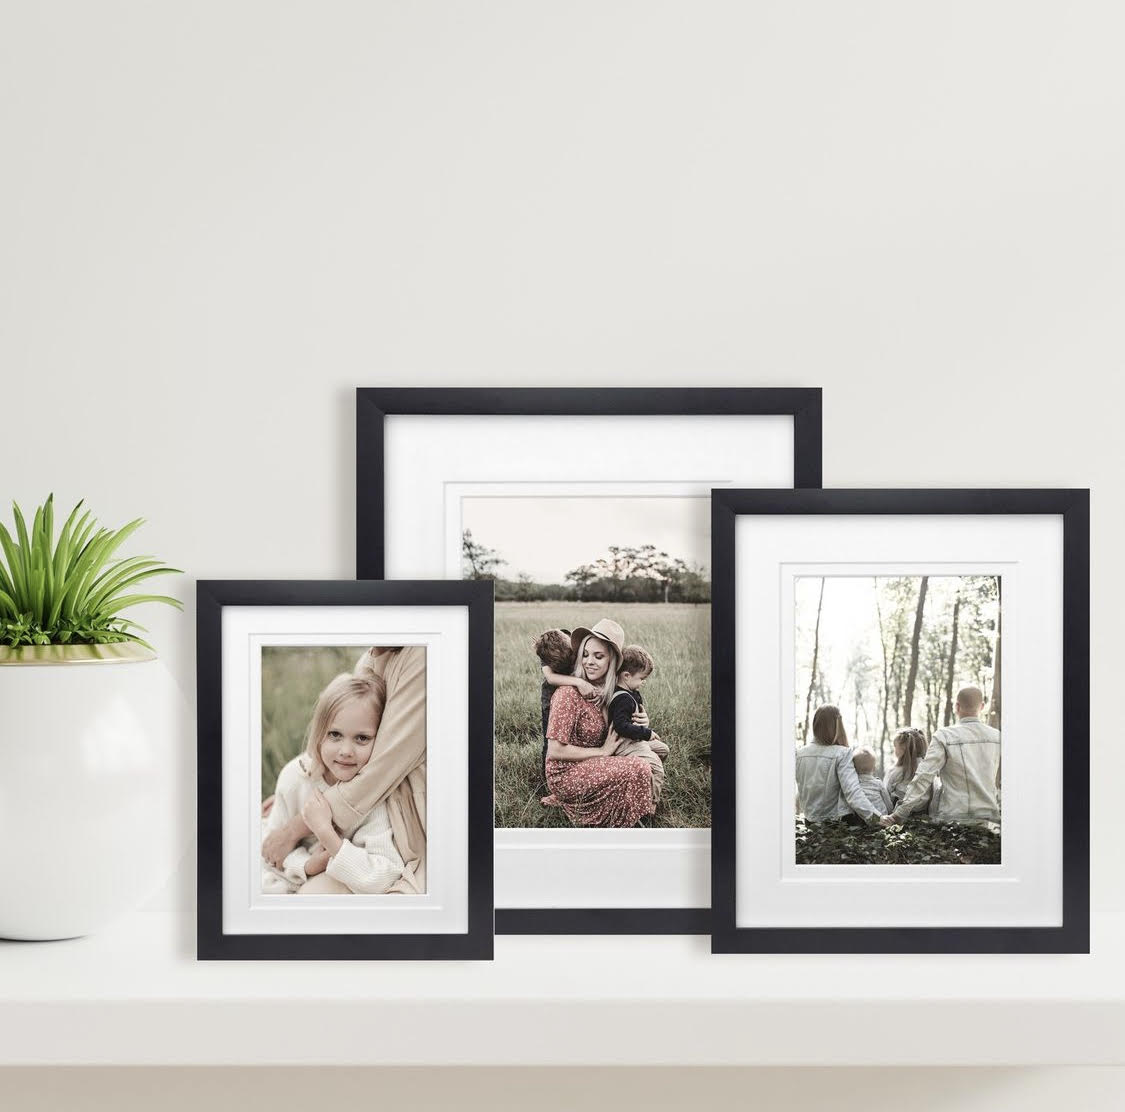 11x14” black timber frame with matboard to suit 8x10” photo